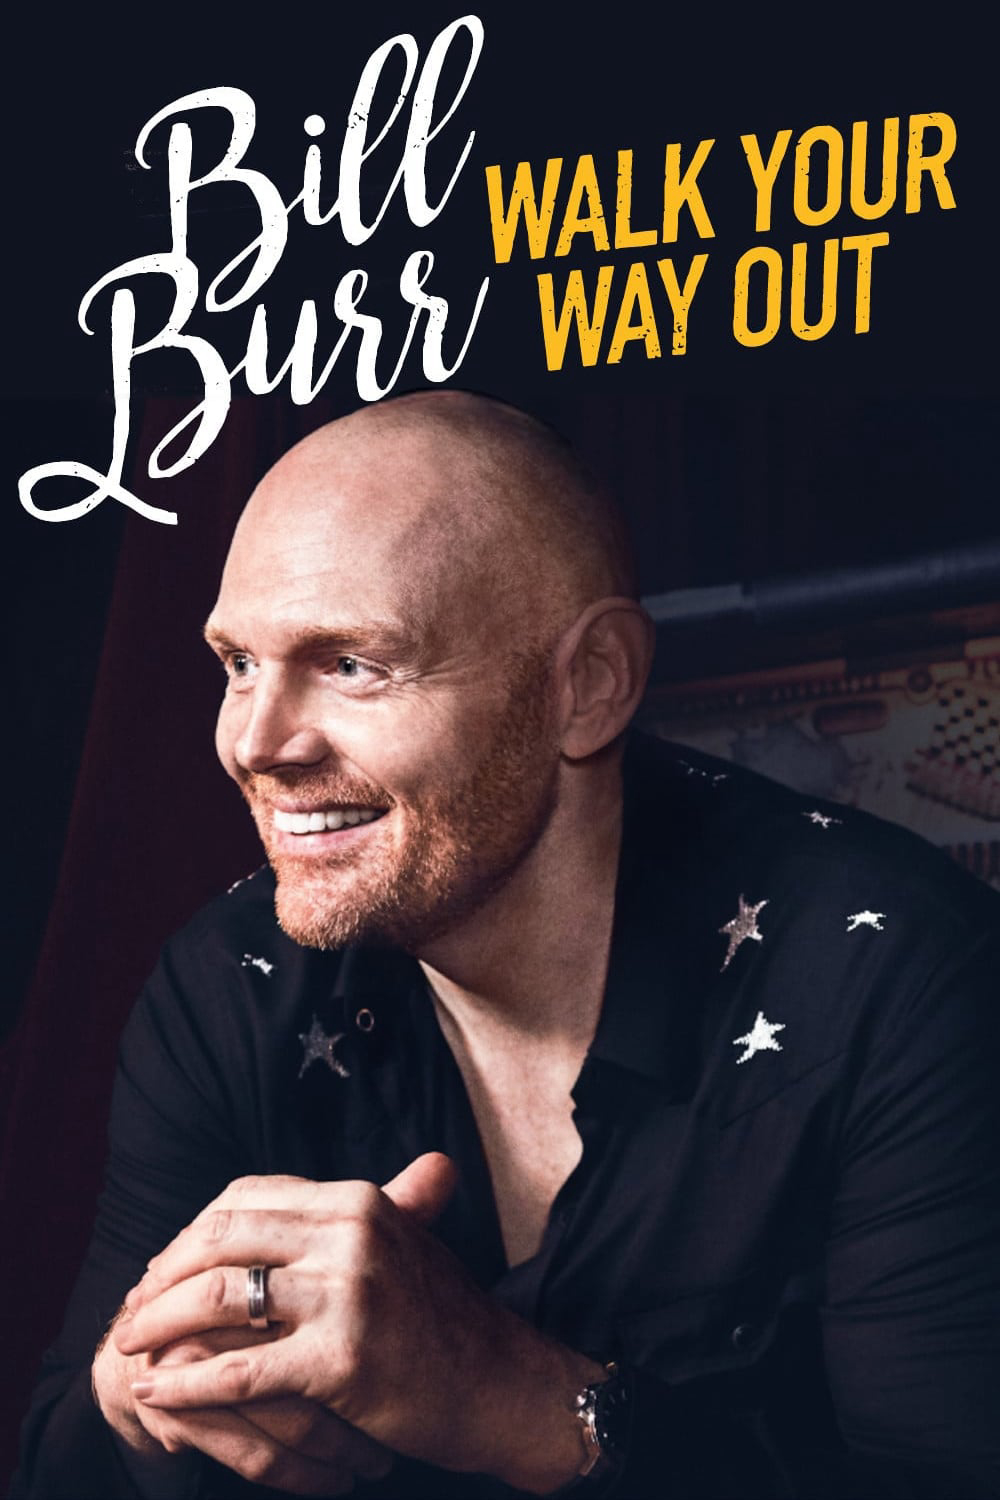 Bill Burr: Walk Your Way Out - Bill Burr: Walk Your Way Out (2017)